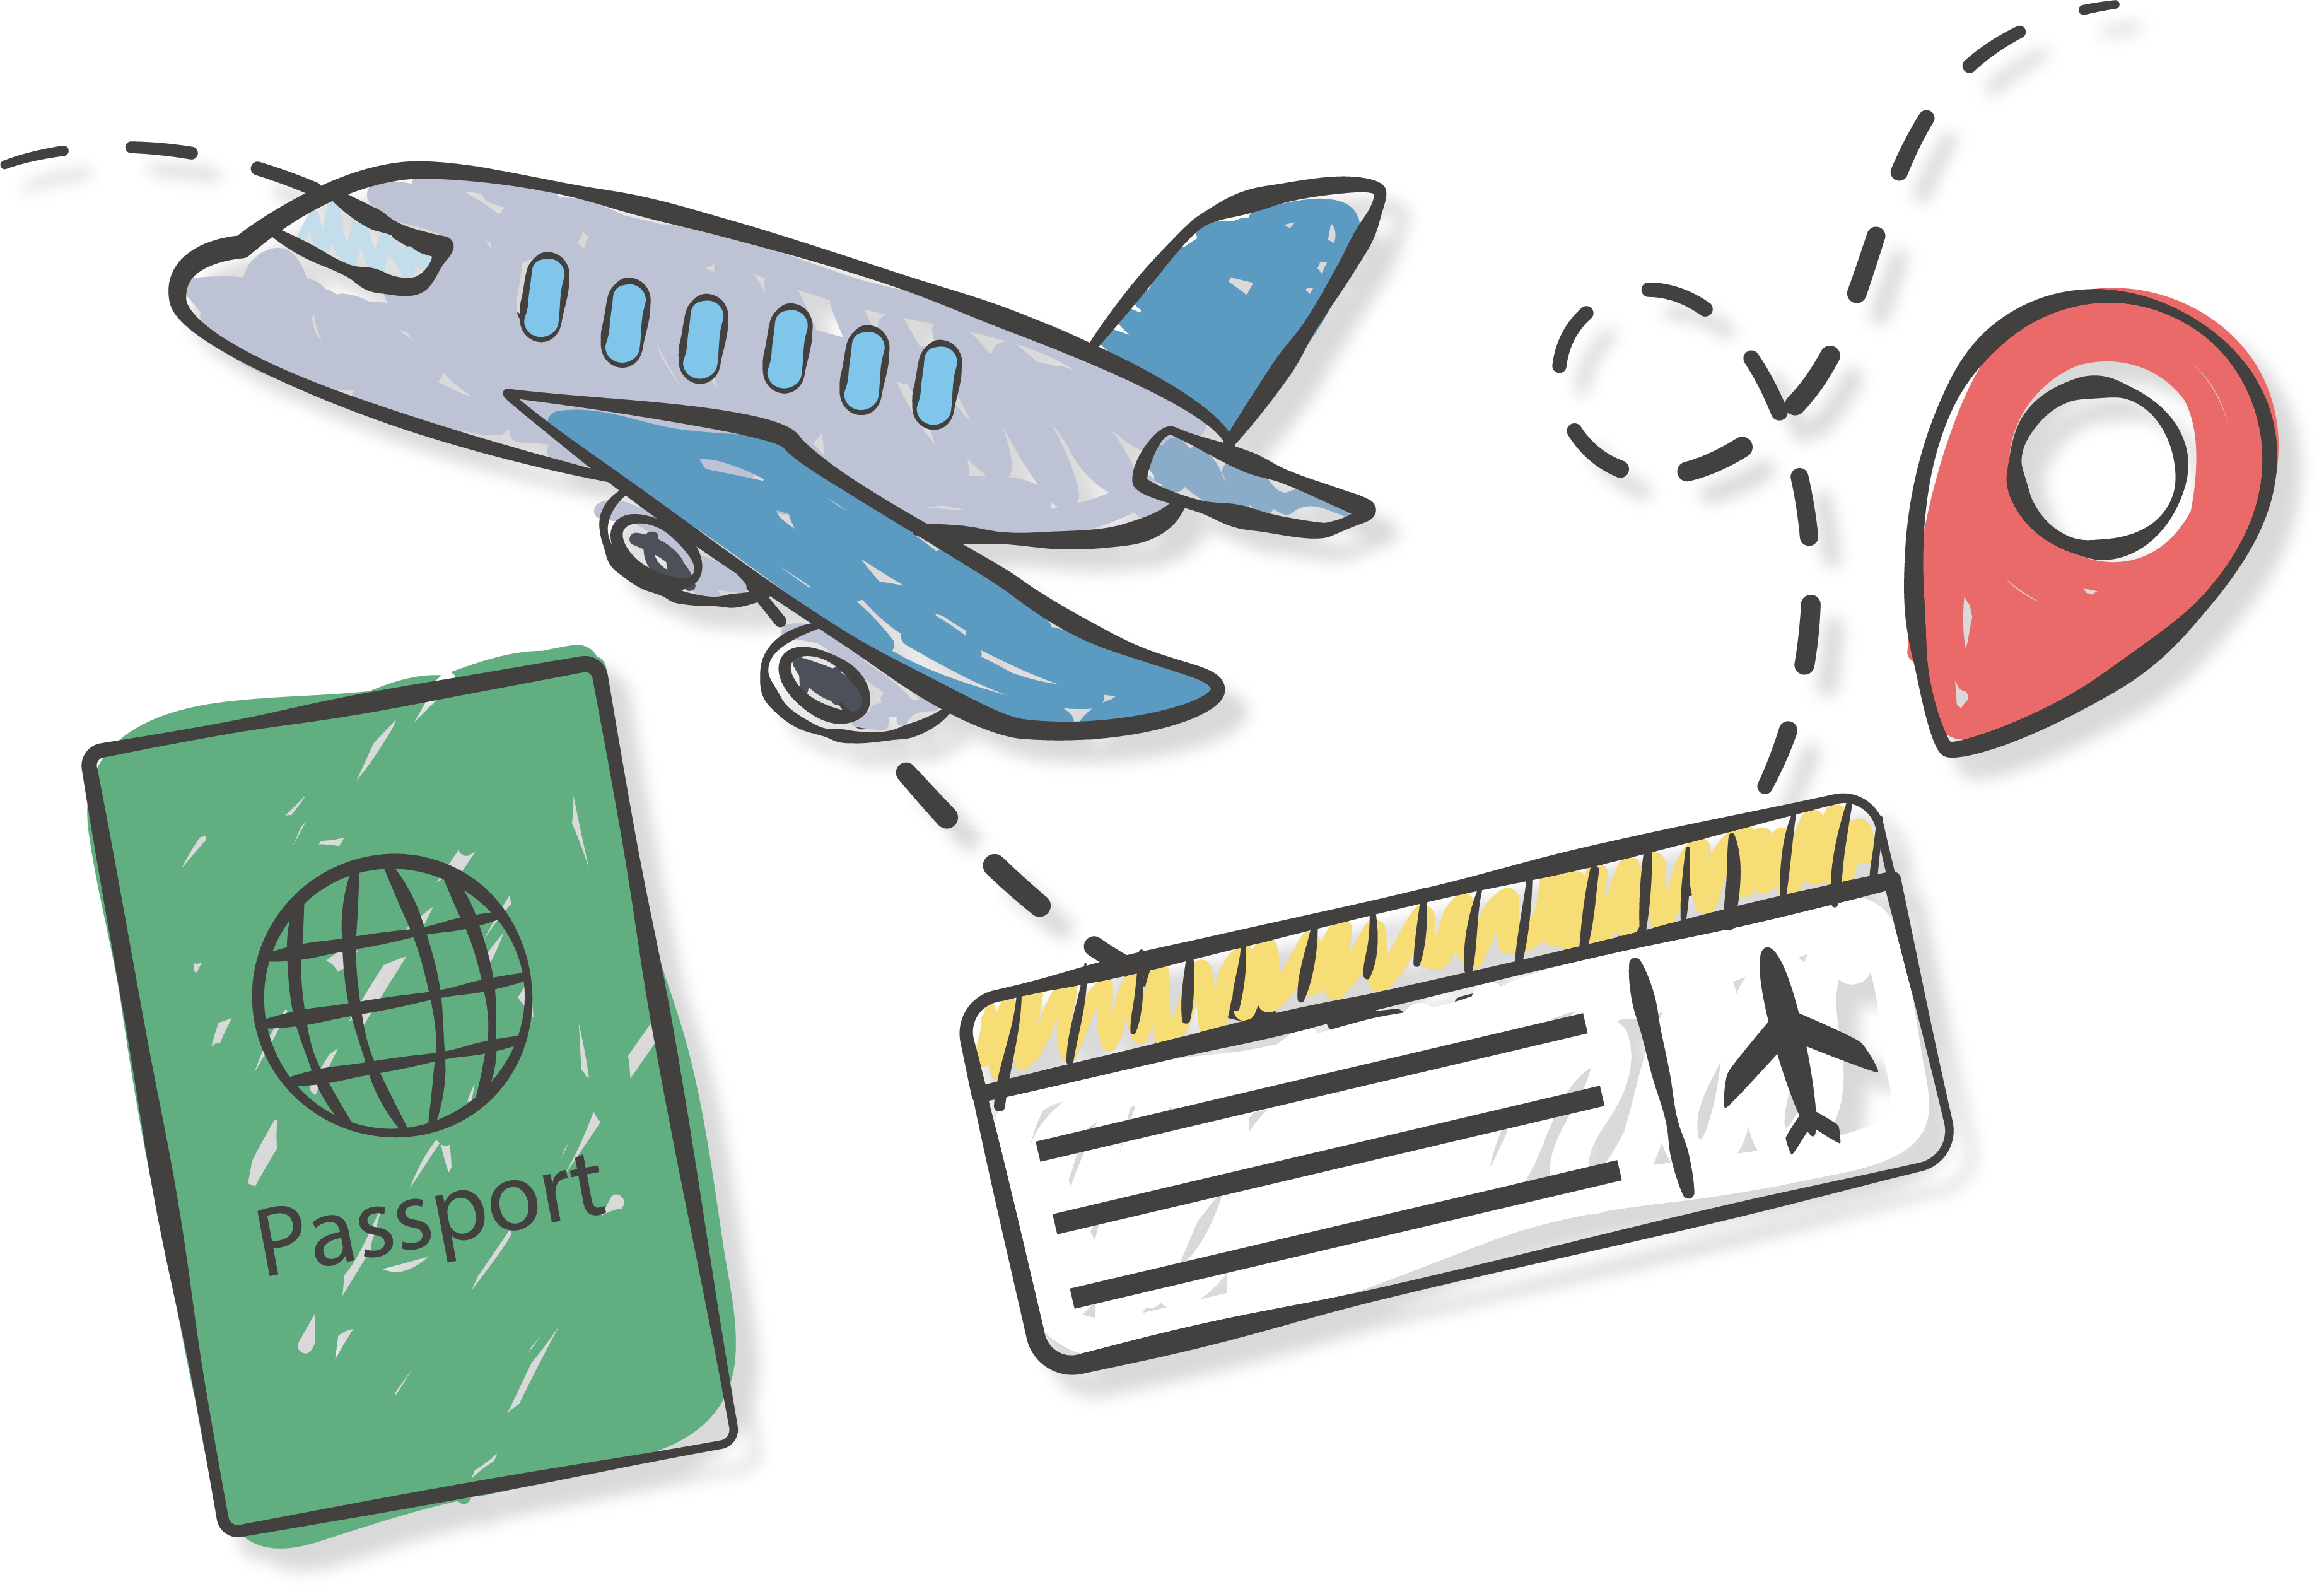 Abroad Painted Travel Hand Airline Passport Airplane Clipart